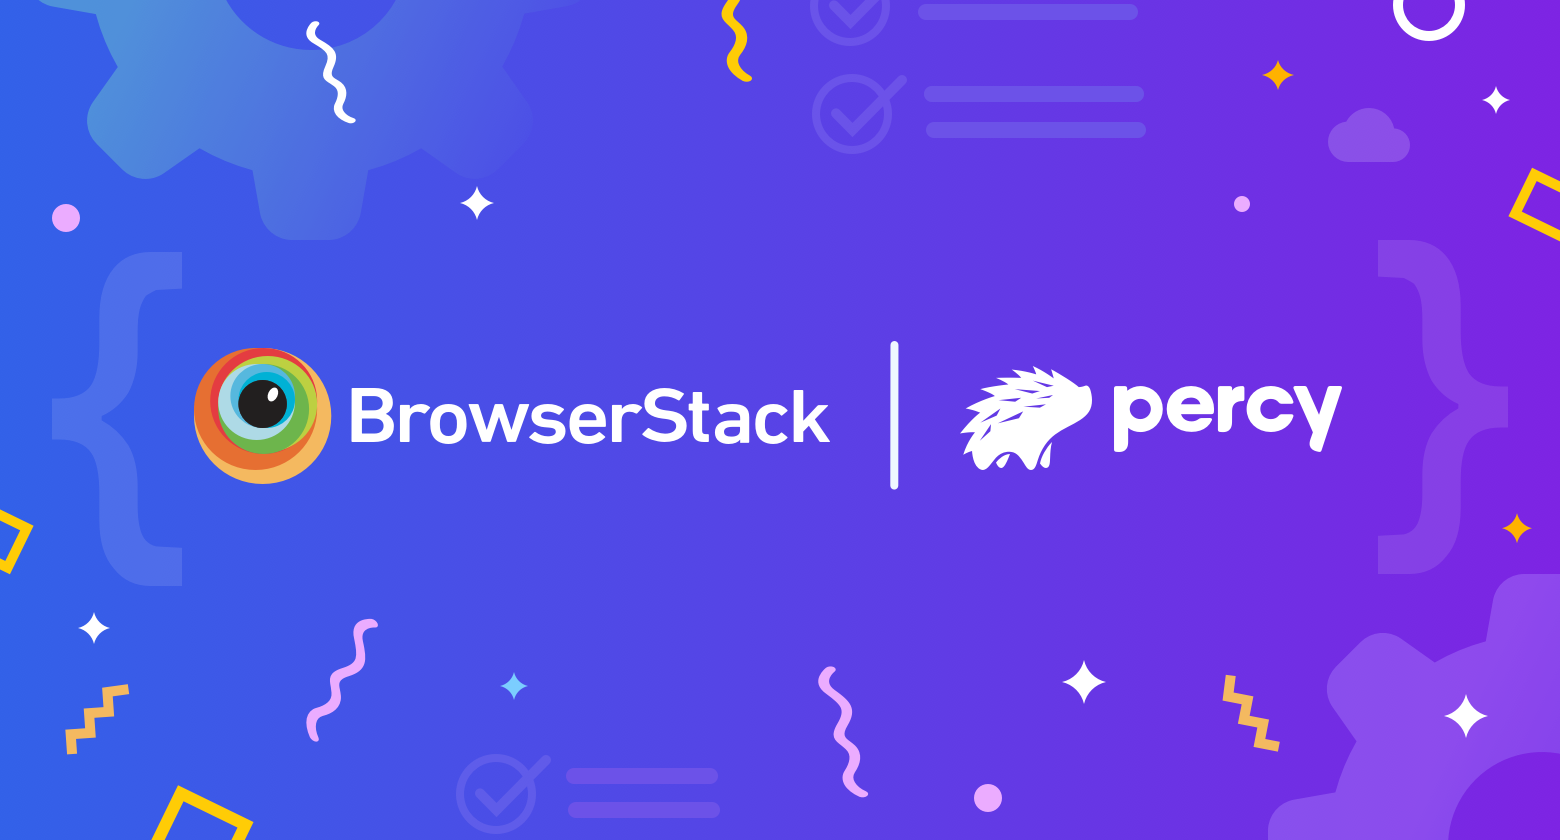 BrowserStack-has-acquired-Percy